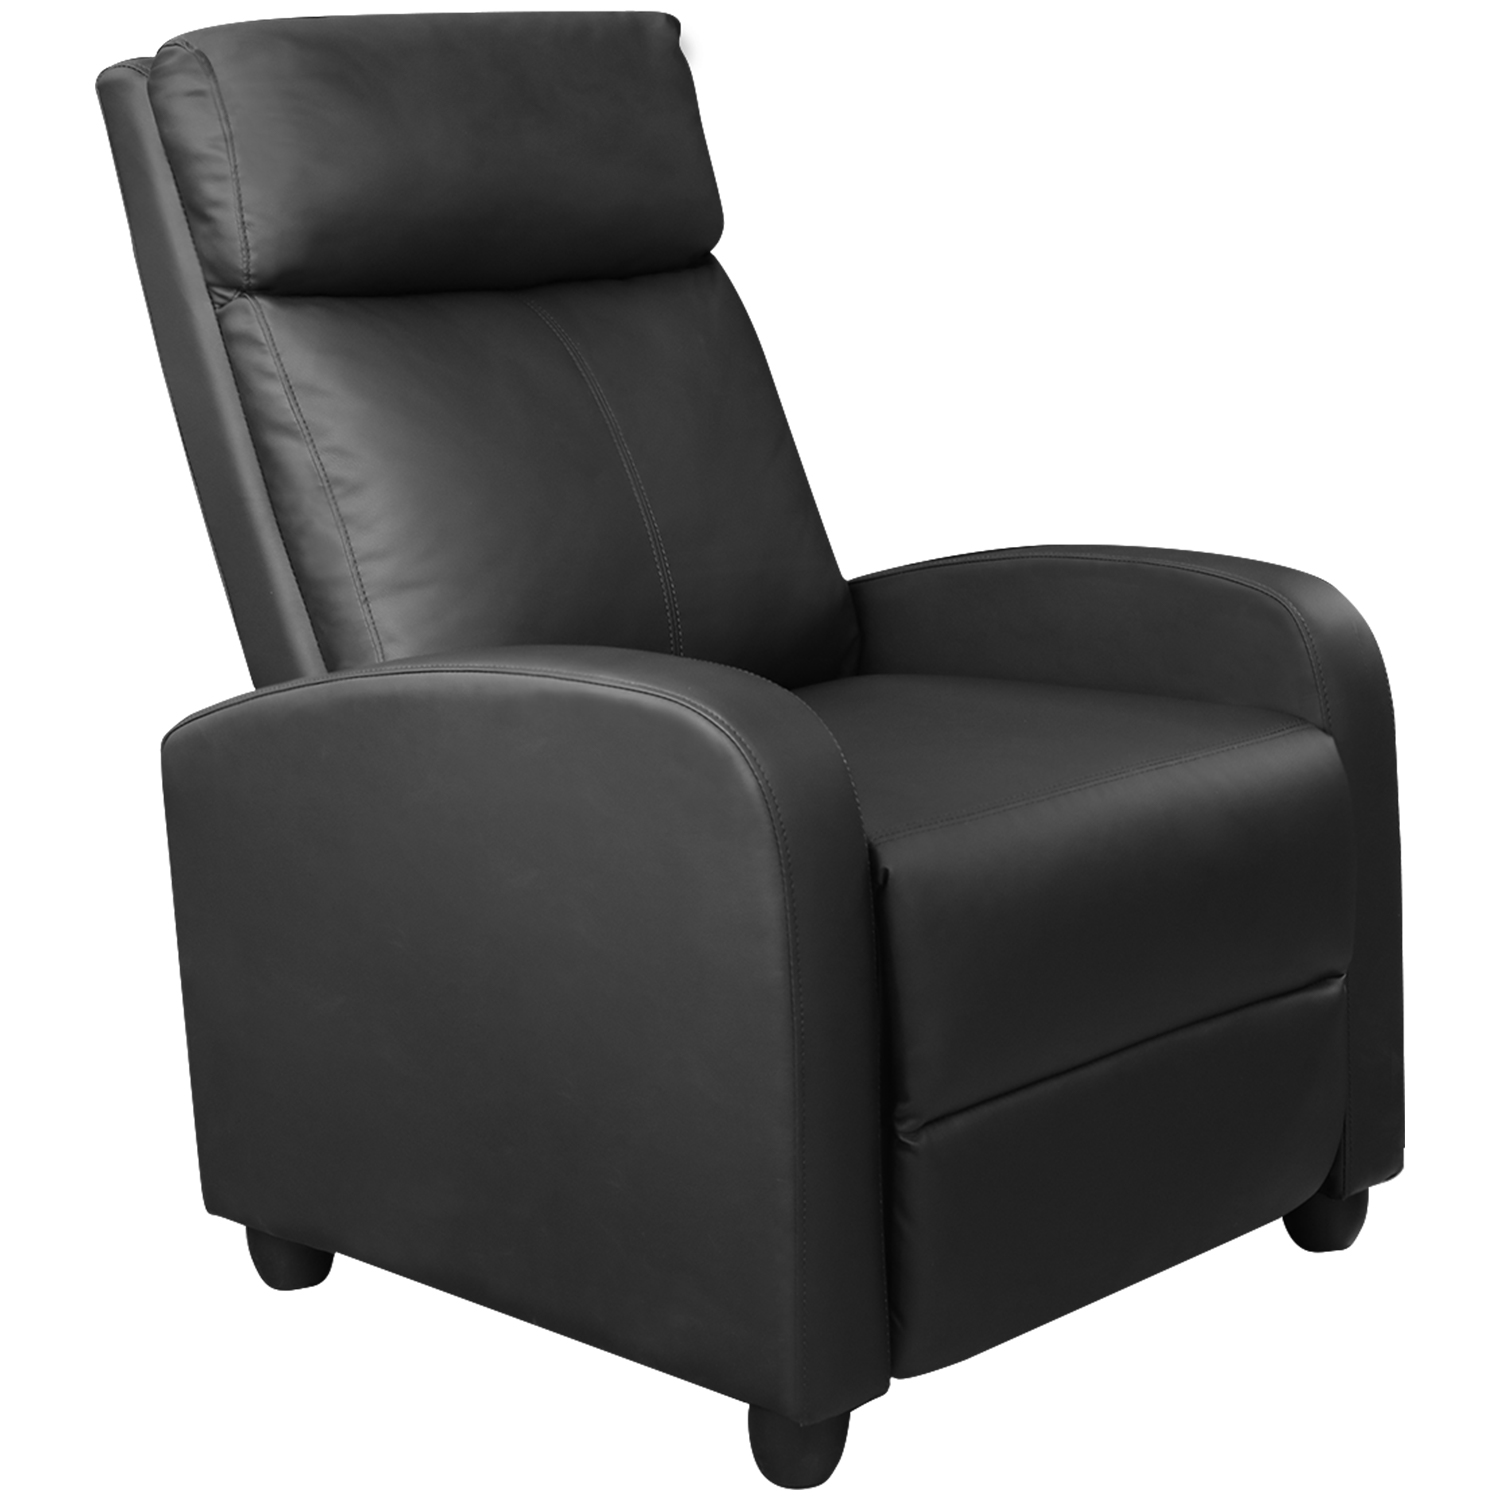 Walnew Single Massage Recliner, Black Faux Leather $119 + Free shipping